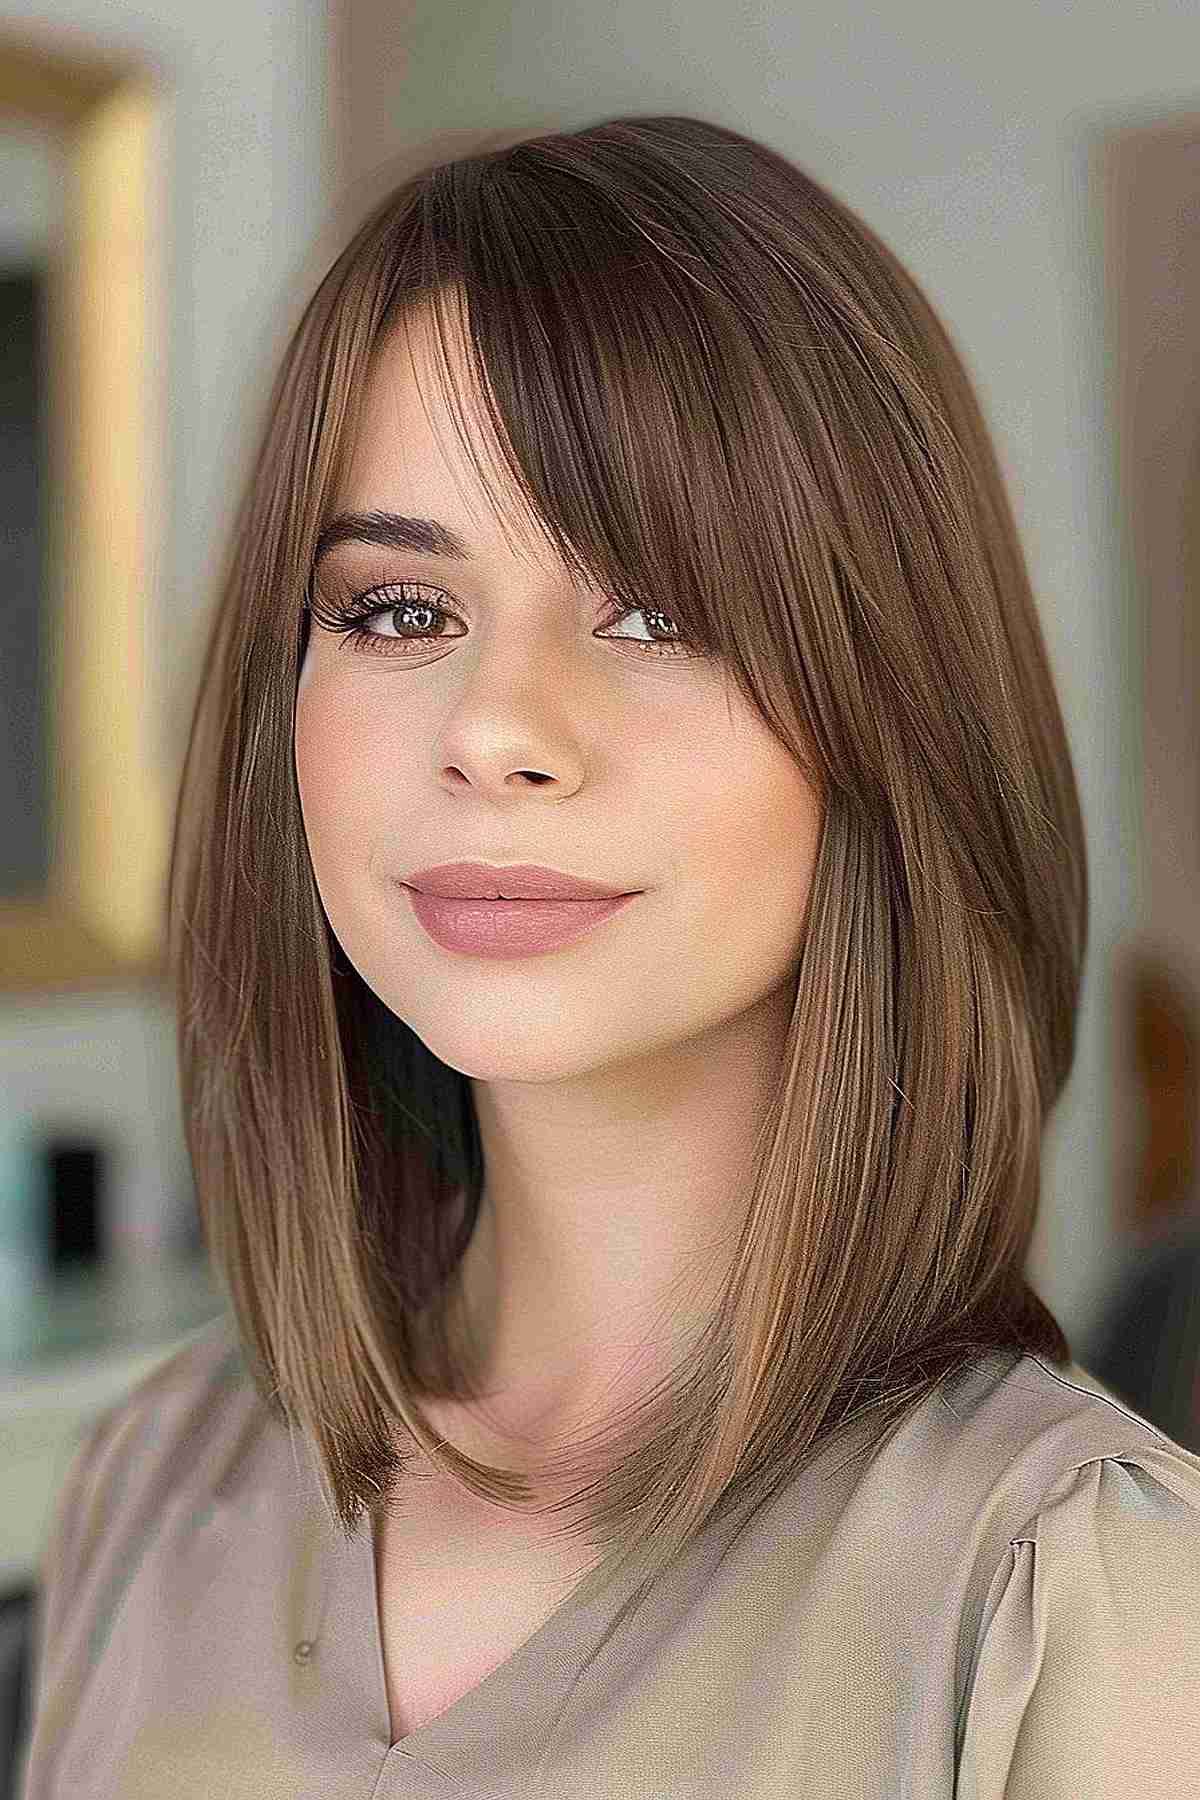 Woman with long bob and bangs for a round face.